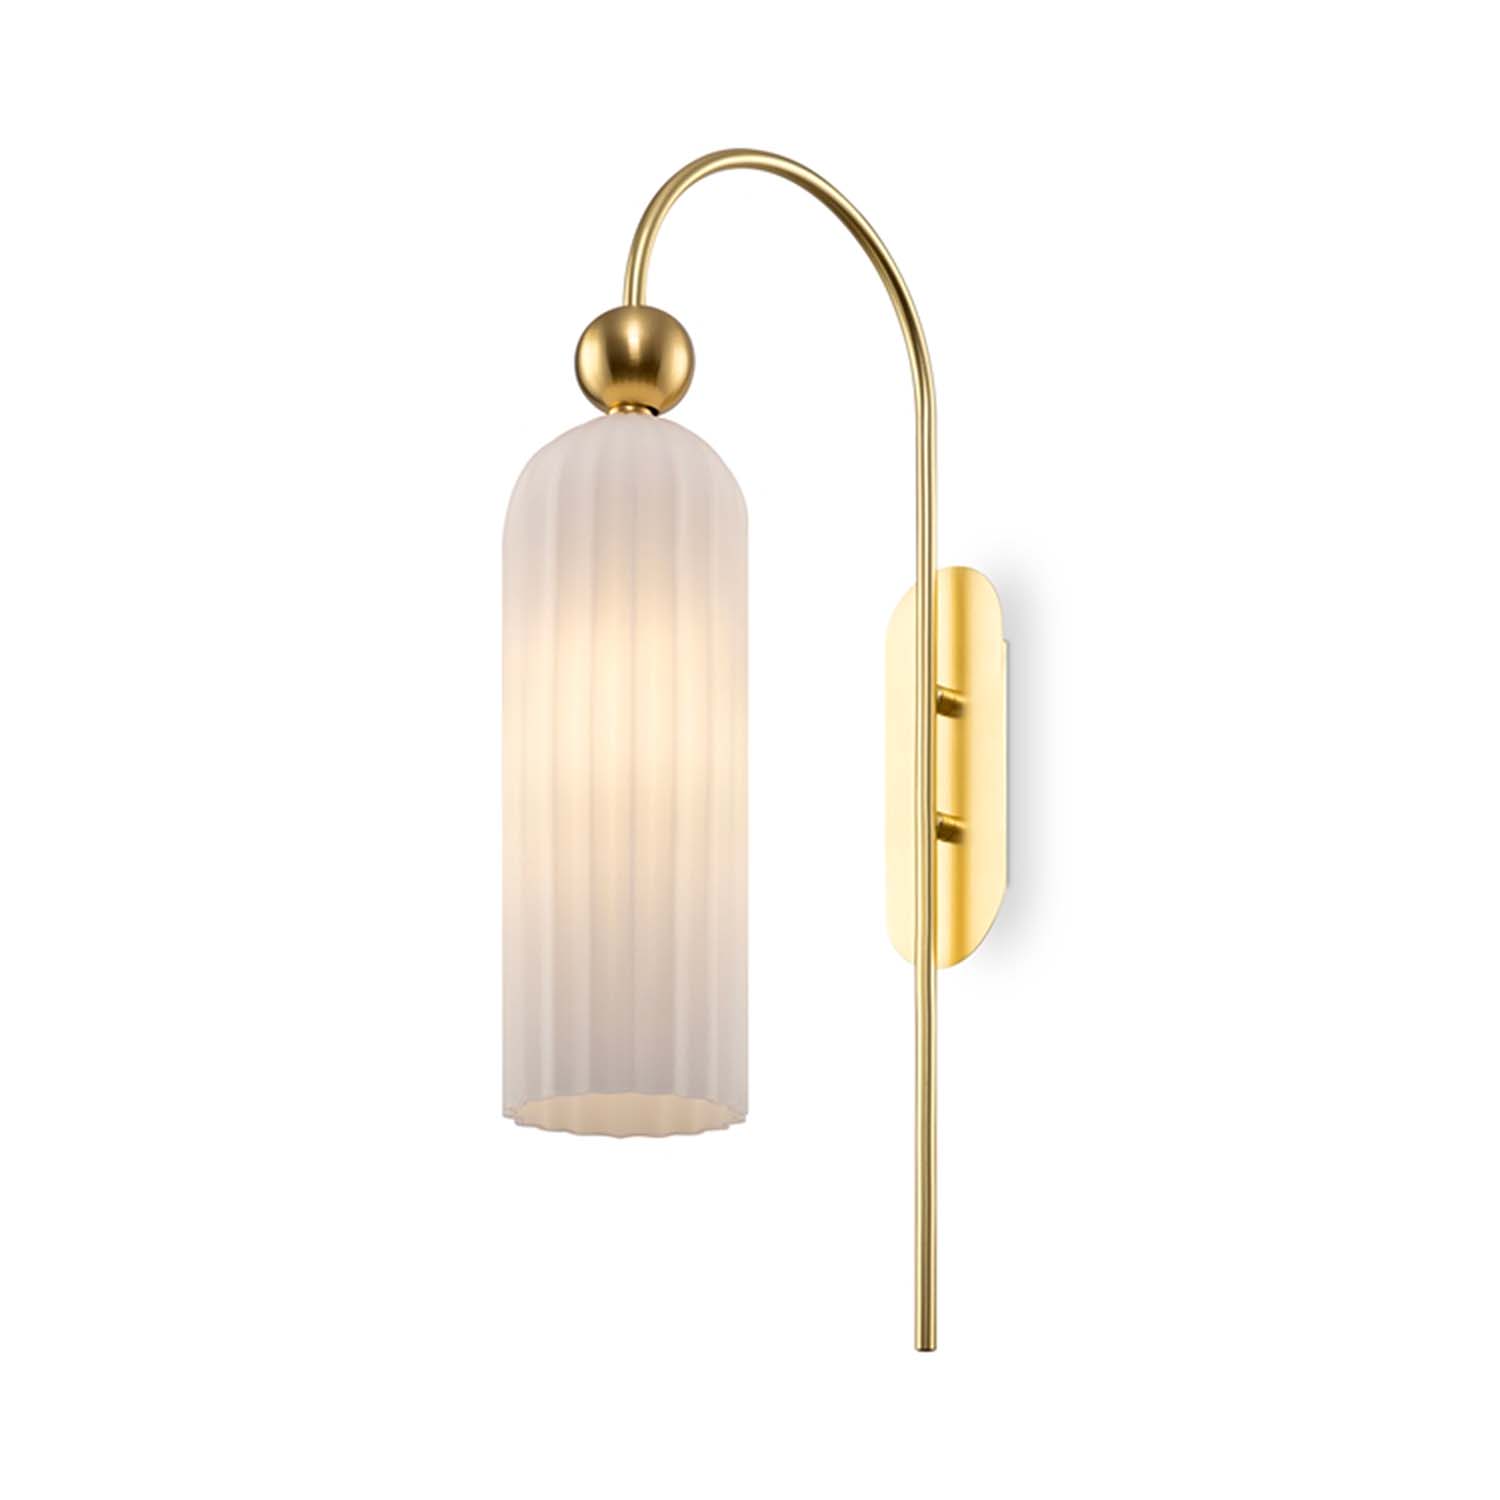 ANTIC A - Chic glass and brass wall light